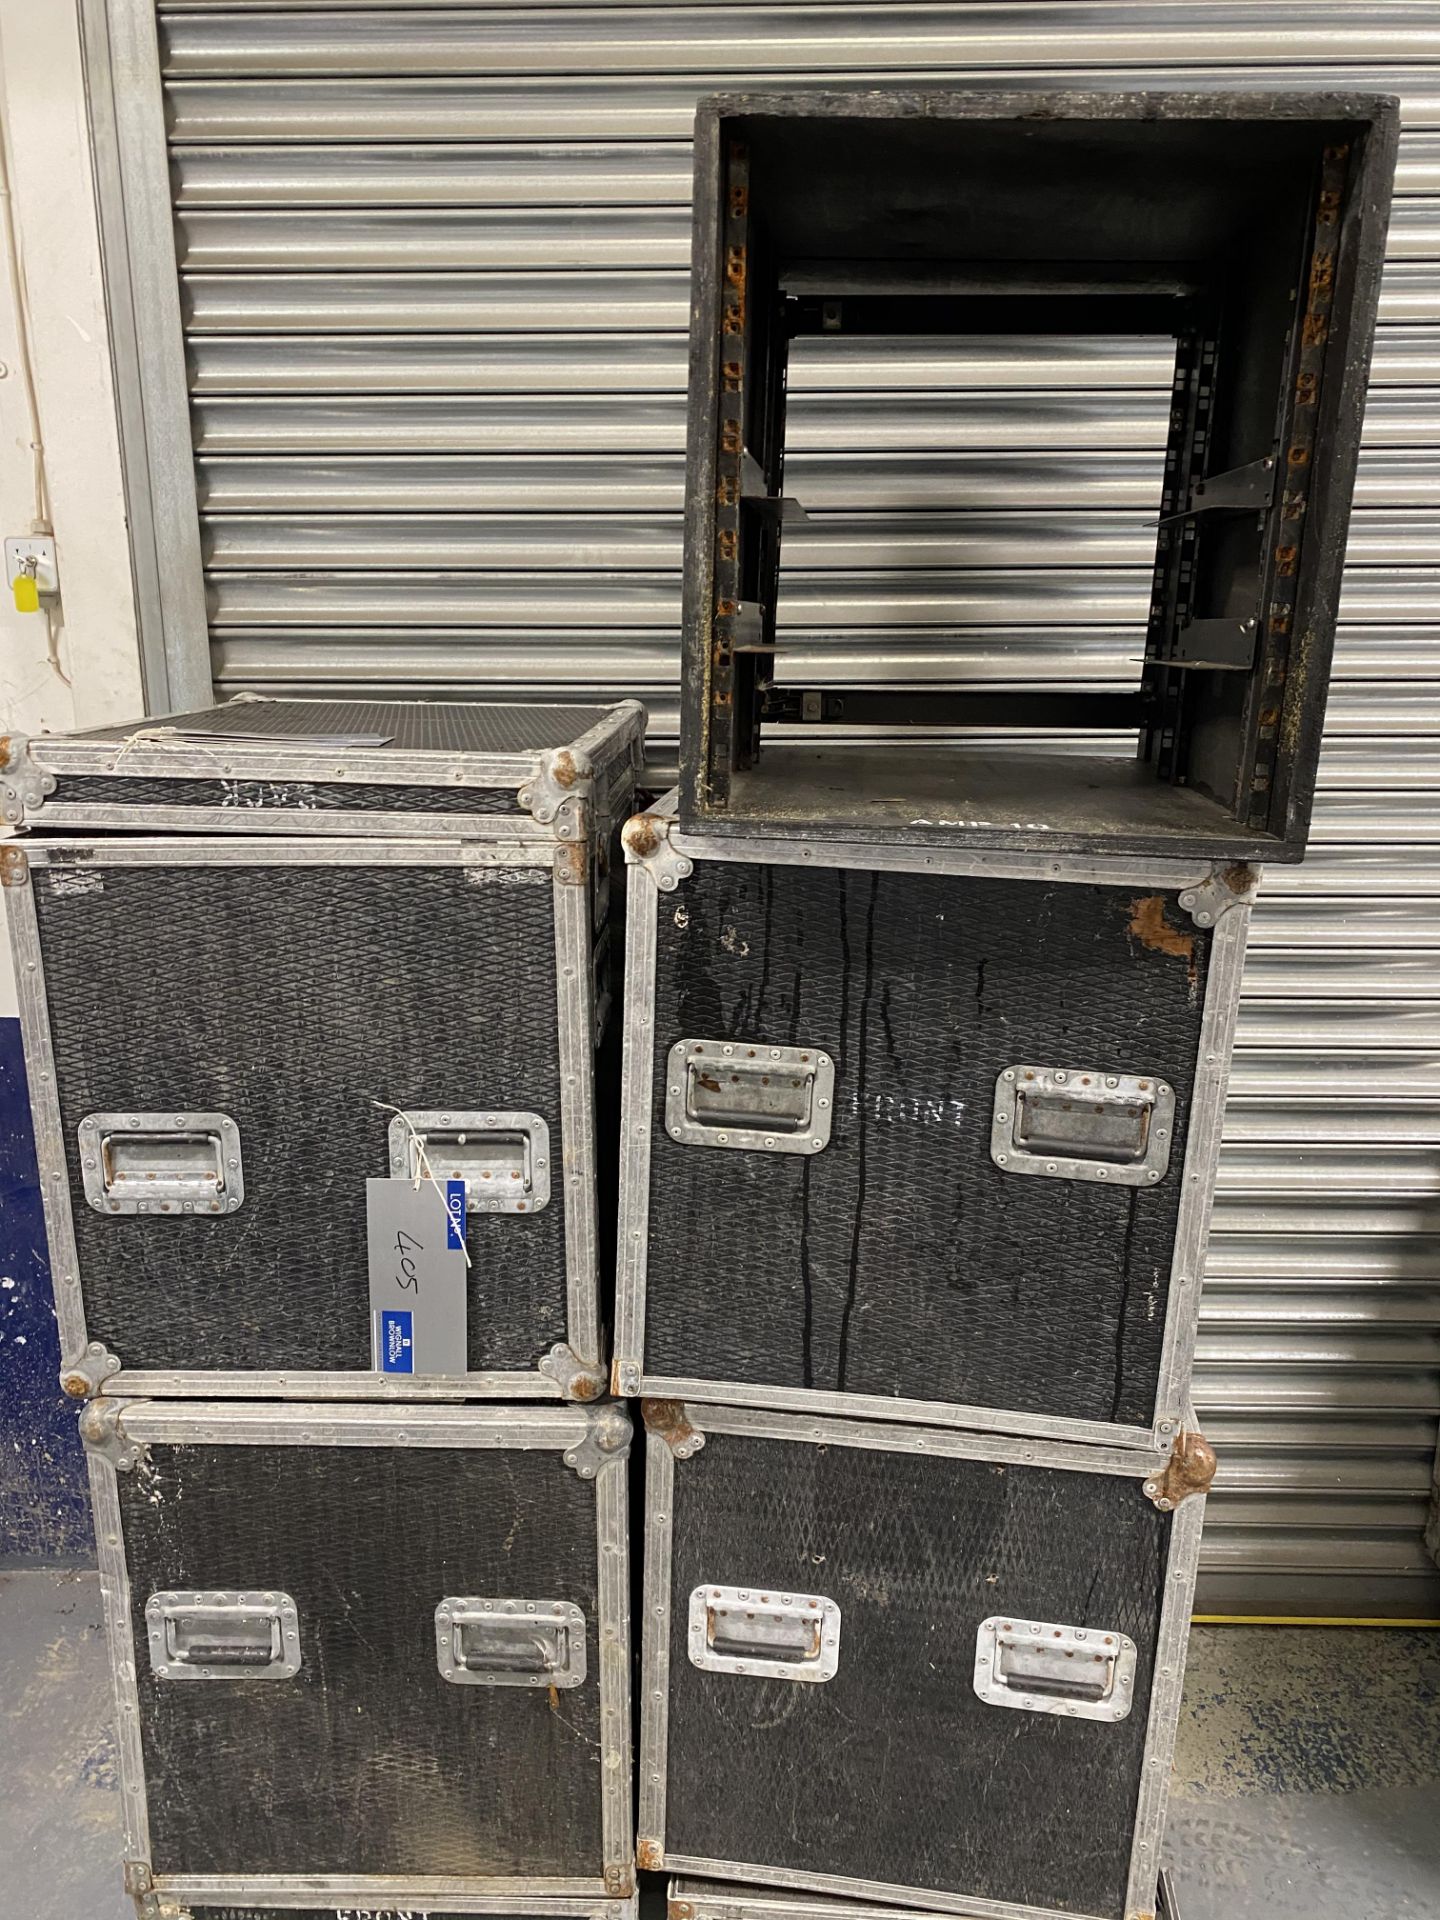 4 Flight Cases, 670mm x 680mm x 560mm with 10 unit Rack (need repairs)(located at 17 Deer Park Road,